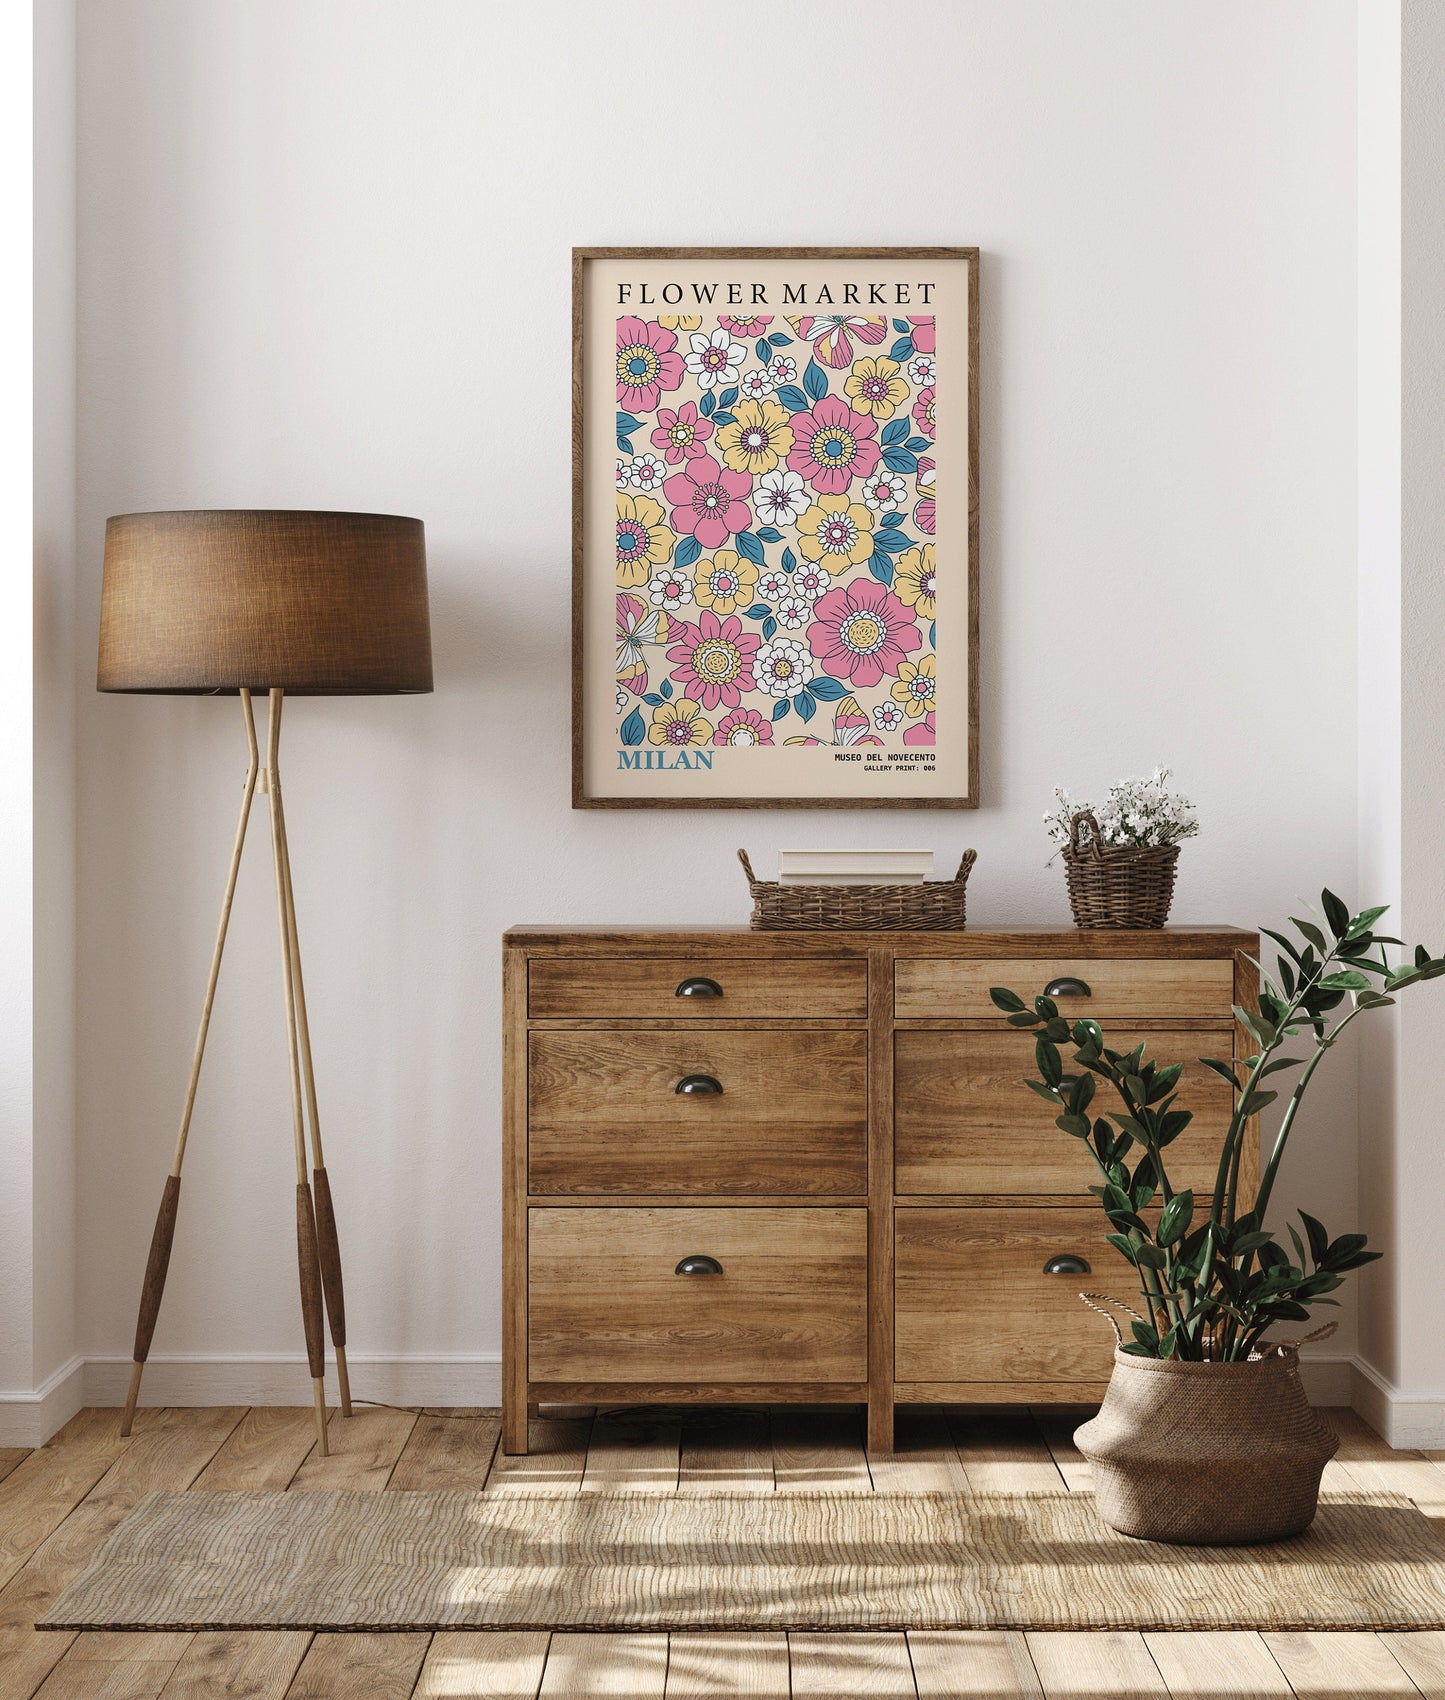 Framed Flower Market Milan Print Museum Exhibition Poster Botanical Floral Decor Poster Ready to hang Home Office Decor Gift for Her